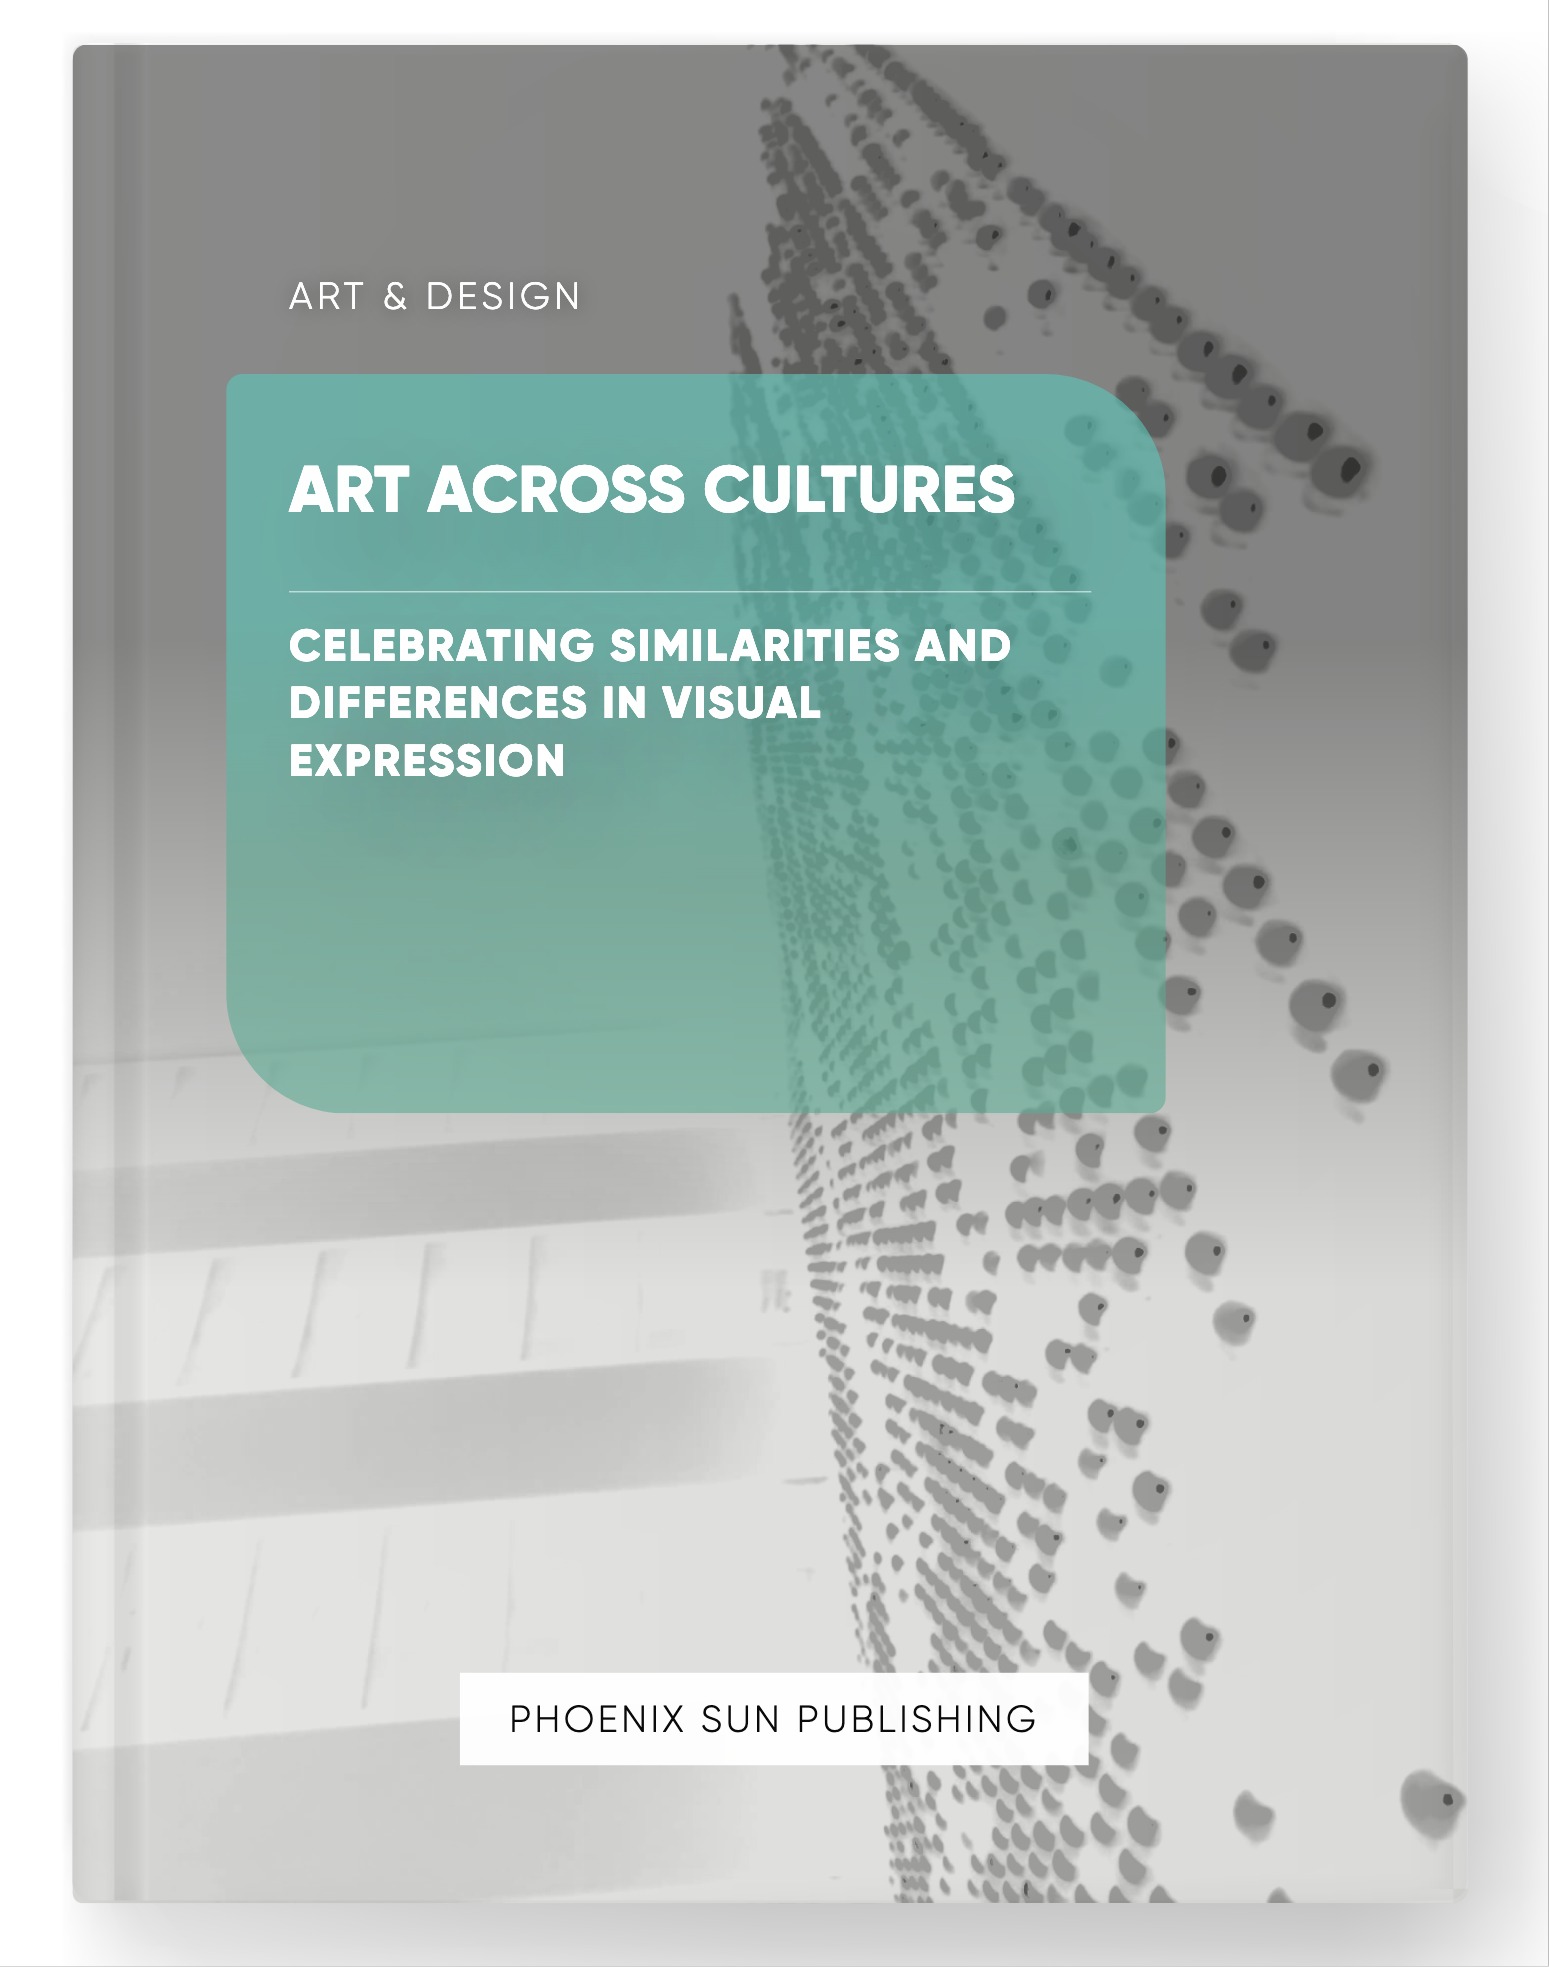 Art Across Cultures – Celebrating Similarities and Differences in Visual Expression